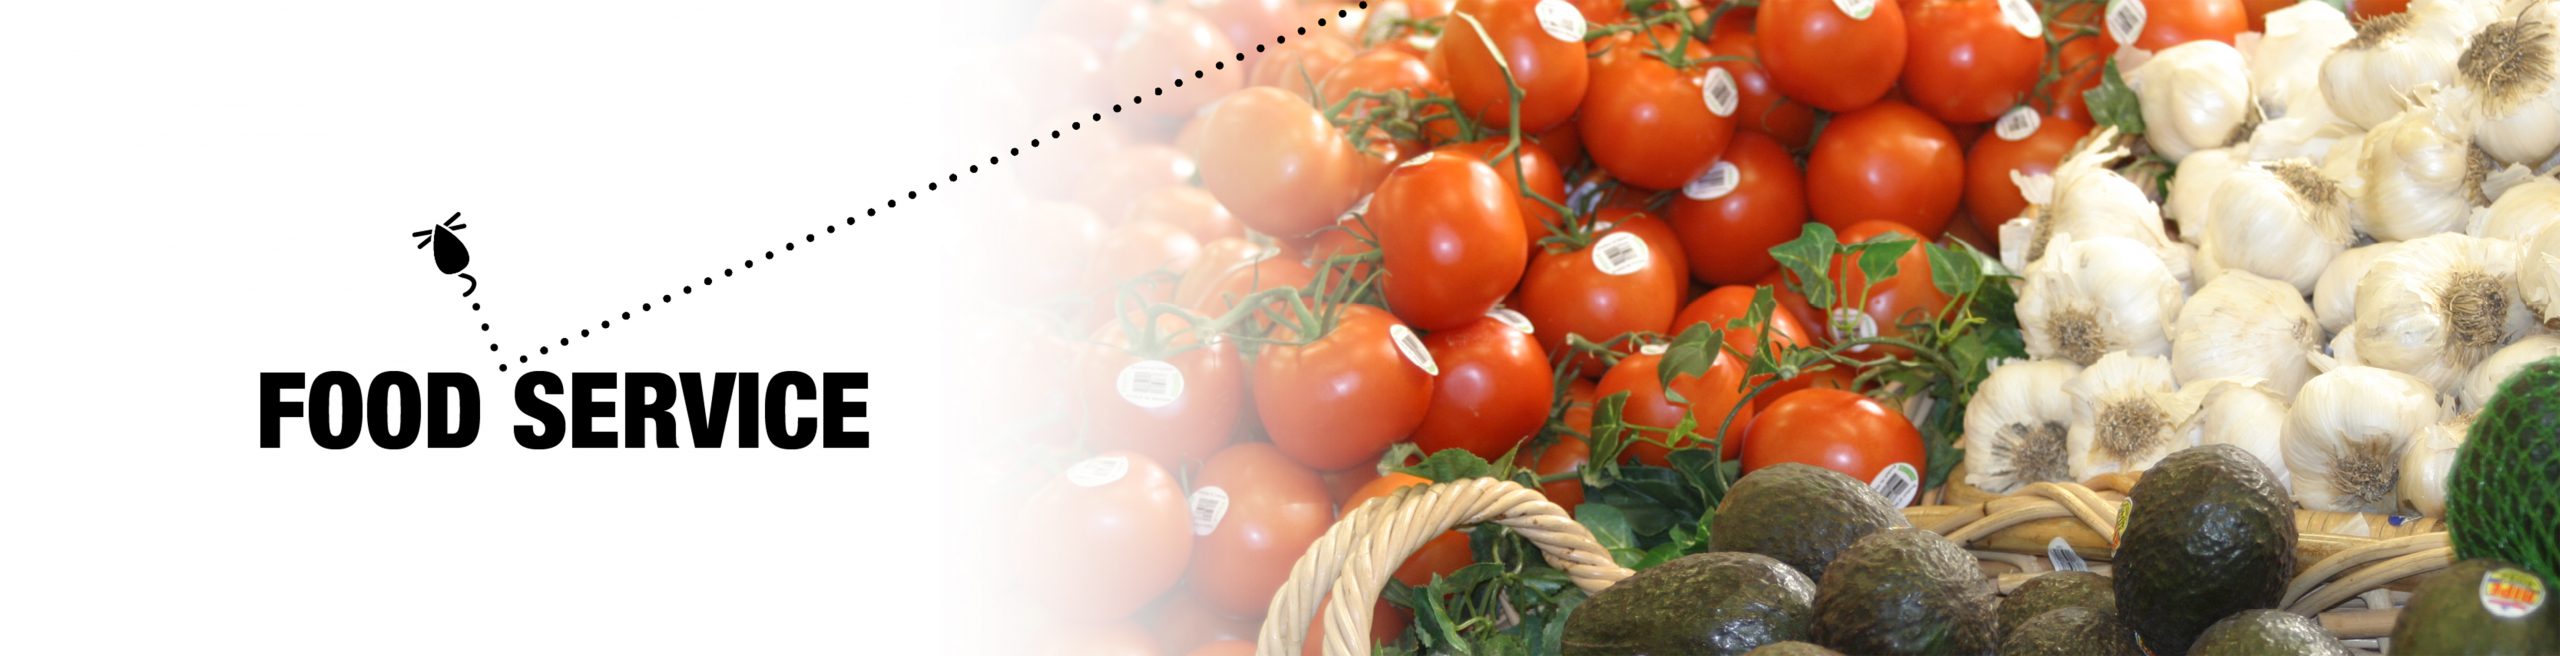 Food service header with image of produce